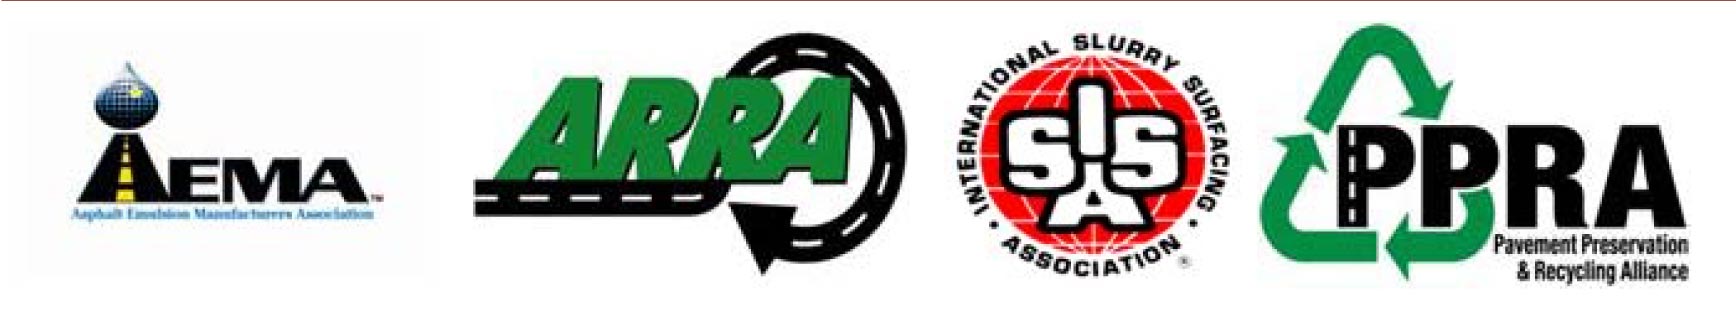 AEMA-ARRA-ISSA introduce Pavement Preservation & Recycling Alliance